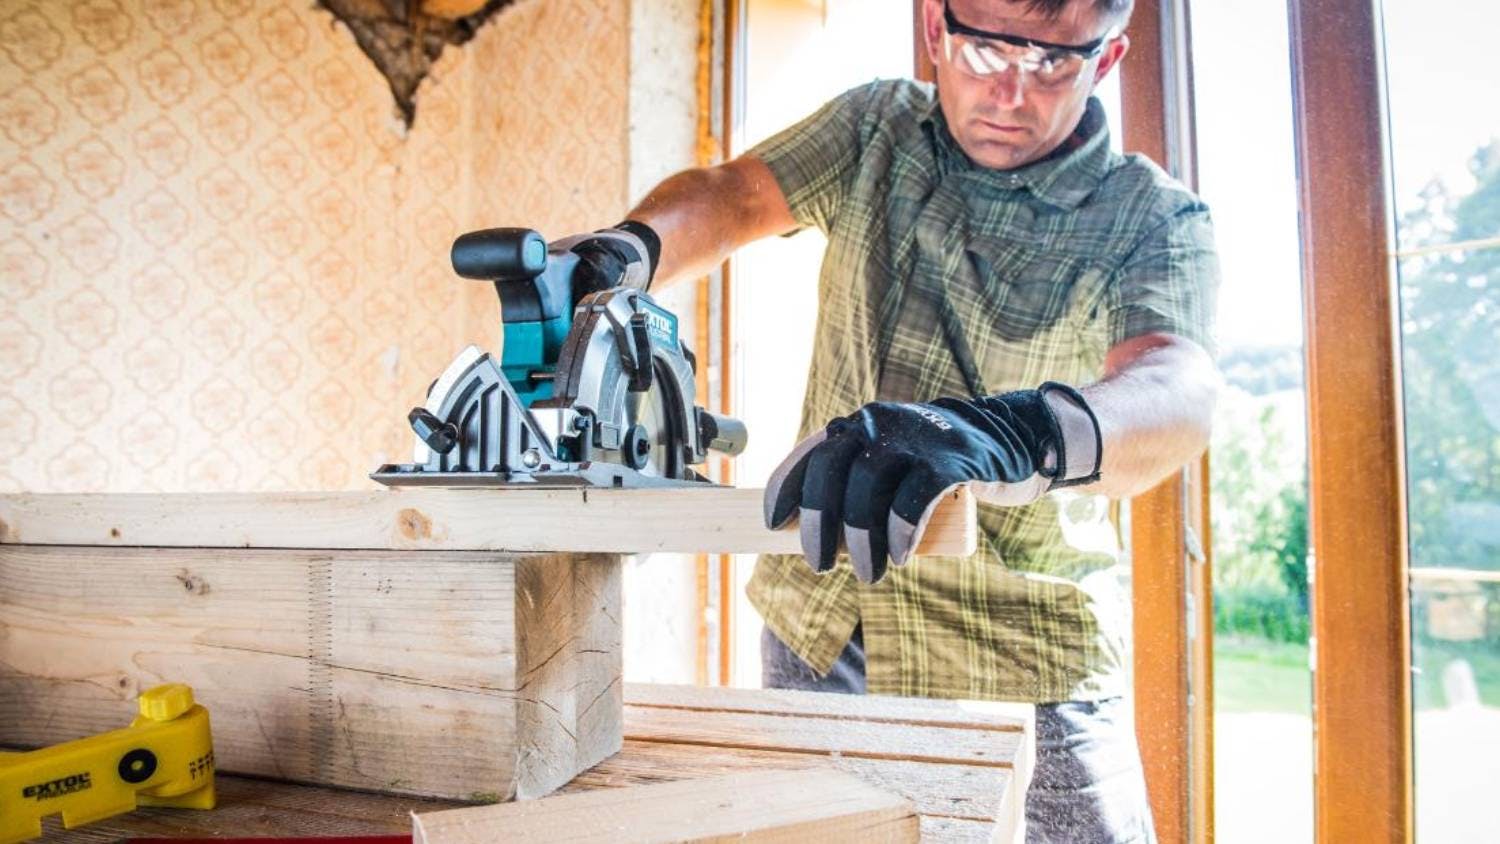 Extol Industral SHAREV20 Cordless Circular Saw with Brushless Motor